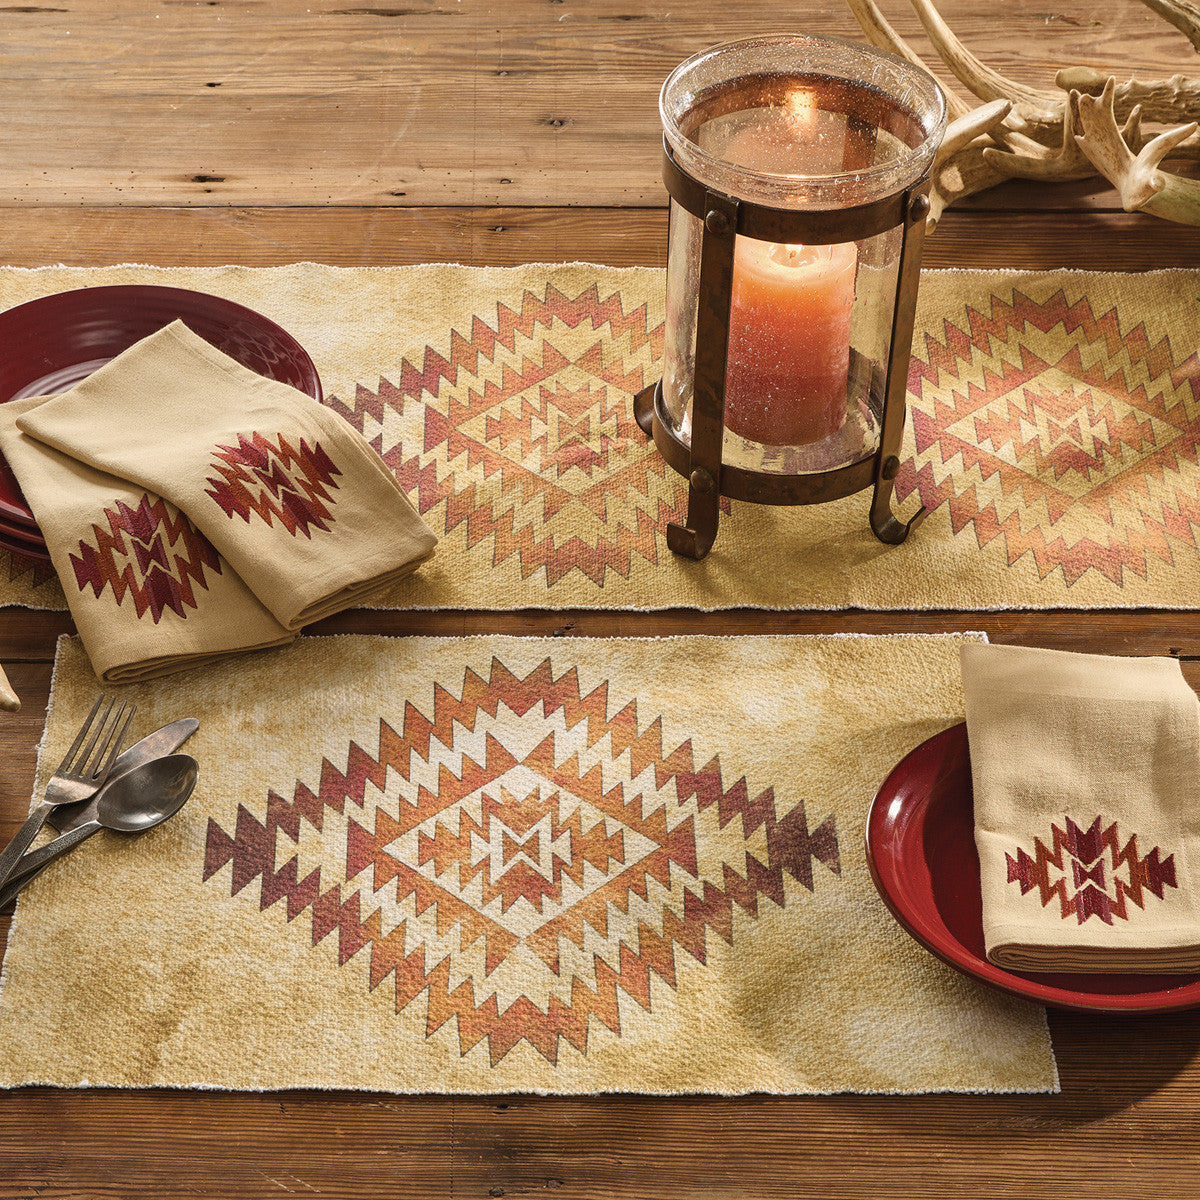 Fire In The Mountains Napkin Set of 12 - Park Designs